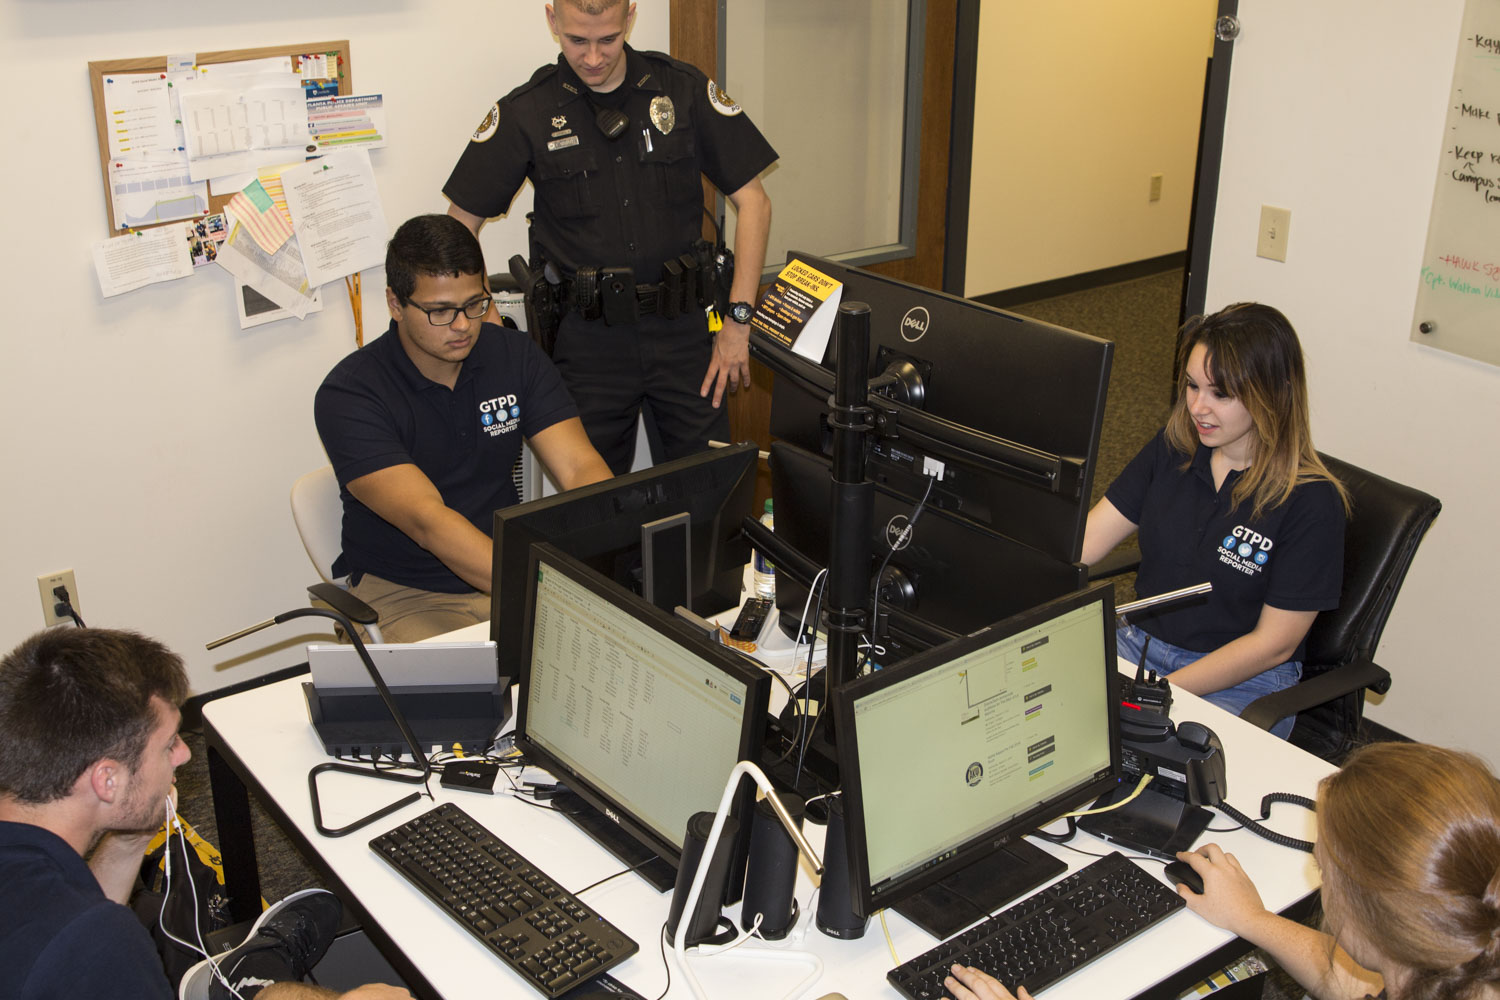 Led by Officer Loran Crabtree, the Georgia Tech Police Department has been operating a social media center since the end of spring semester 2016. The center is staffed by students who help GTPD connect with the student population on a variety of social media platforms.